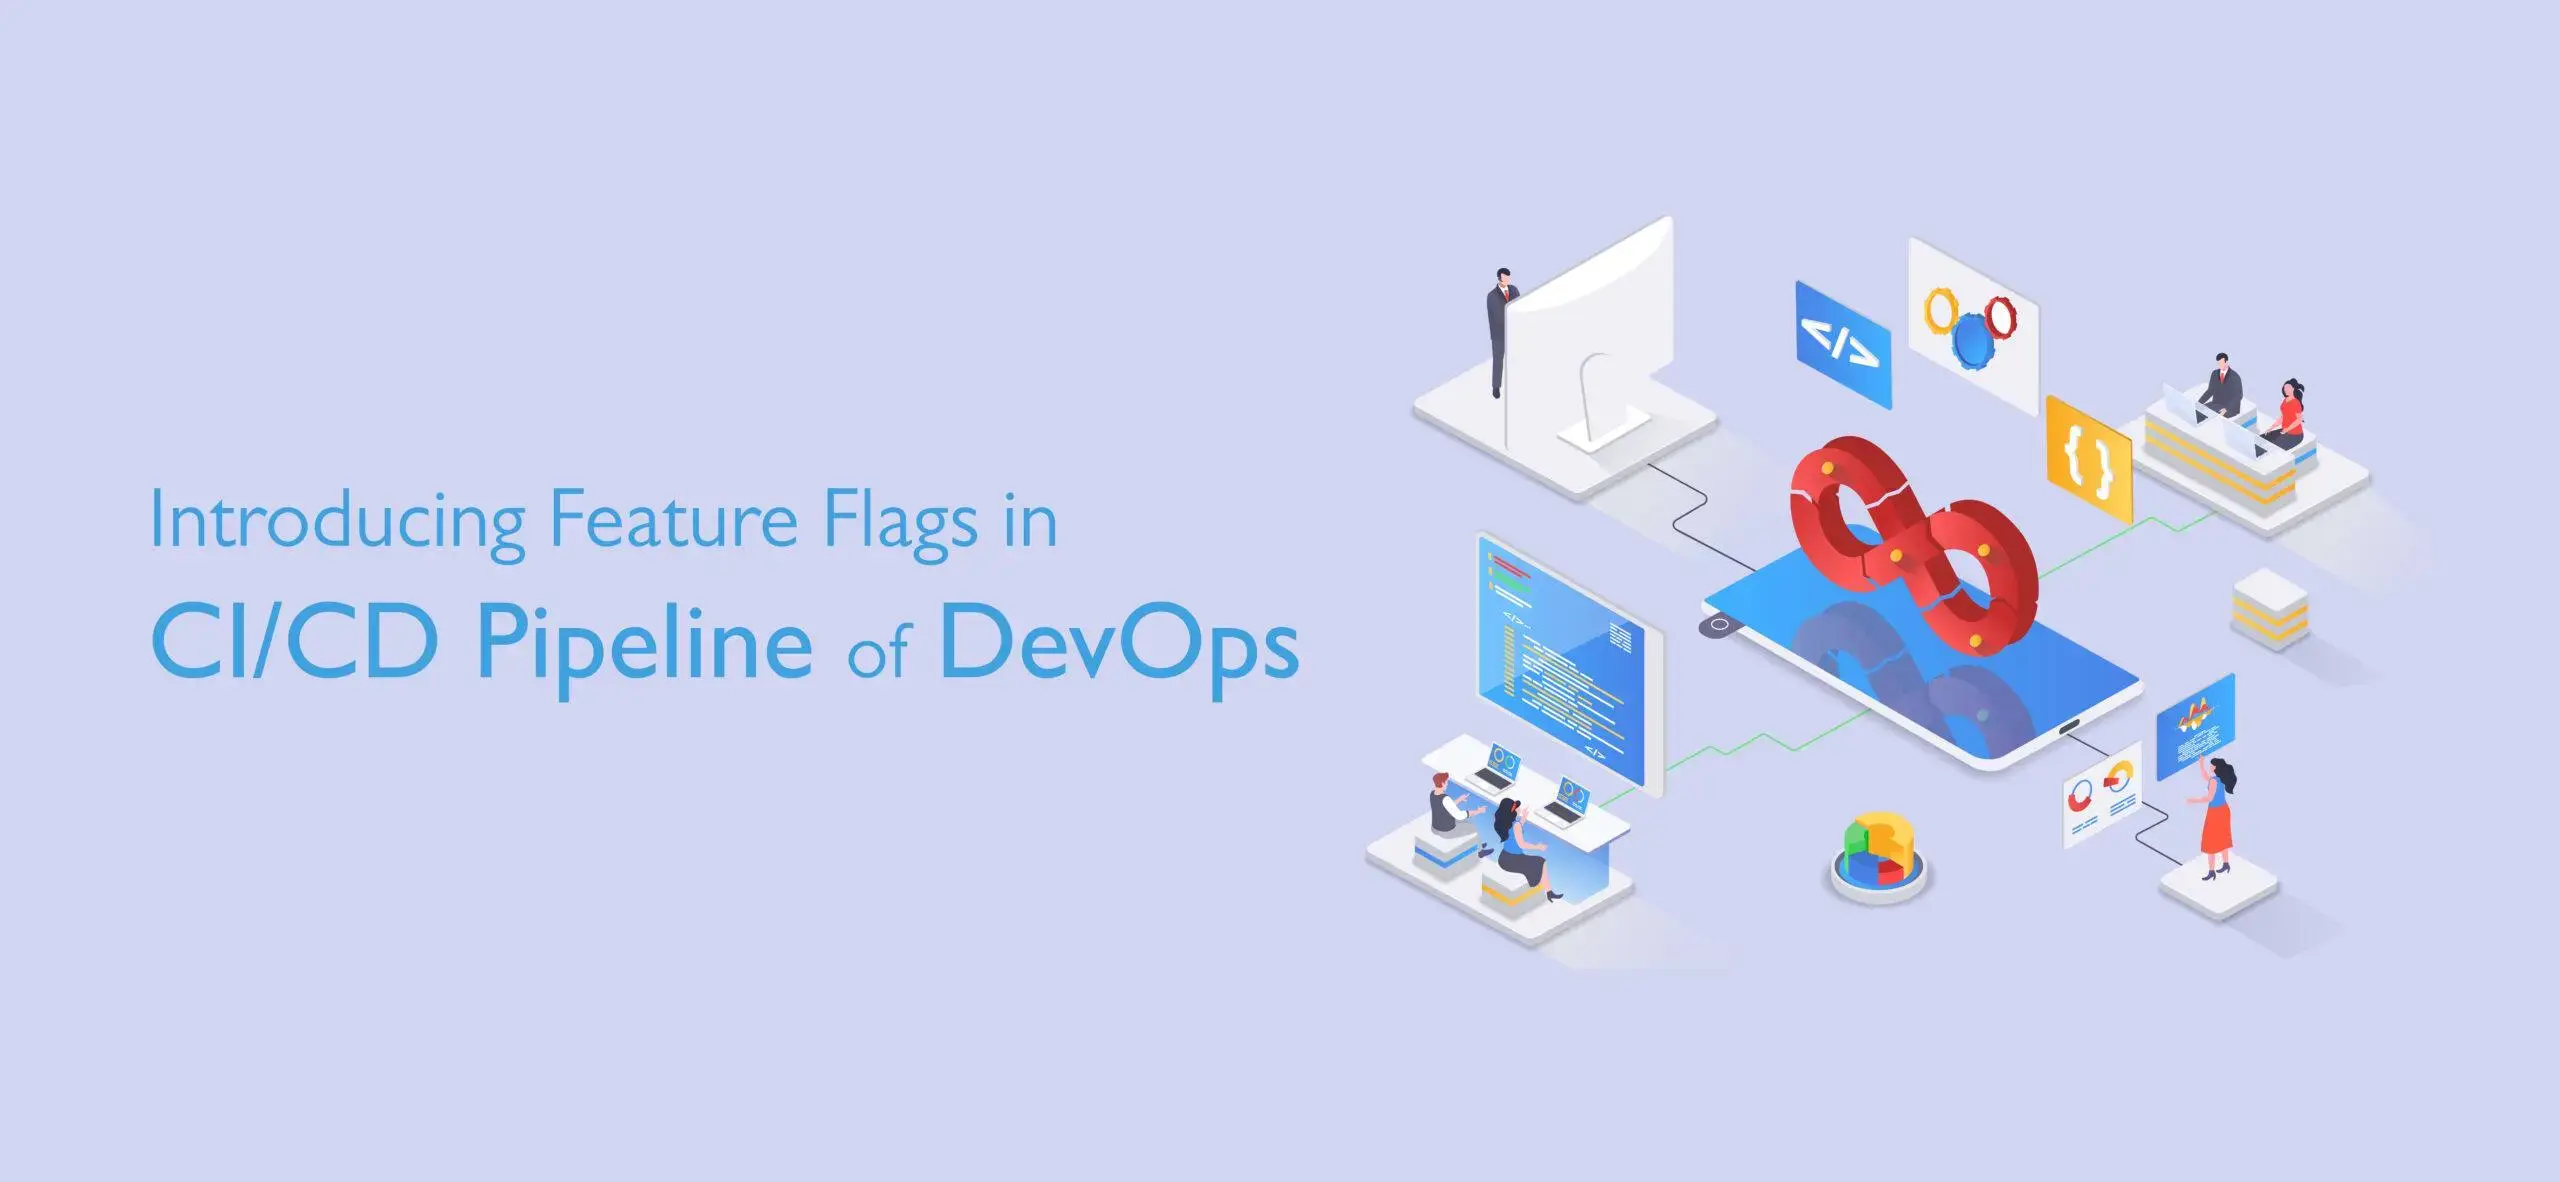 Introducing Feature Flags in CI/CD Pipeline of DevOps